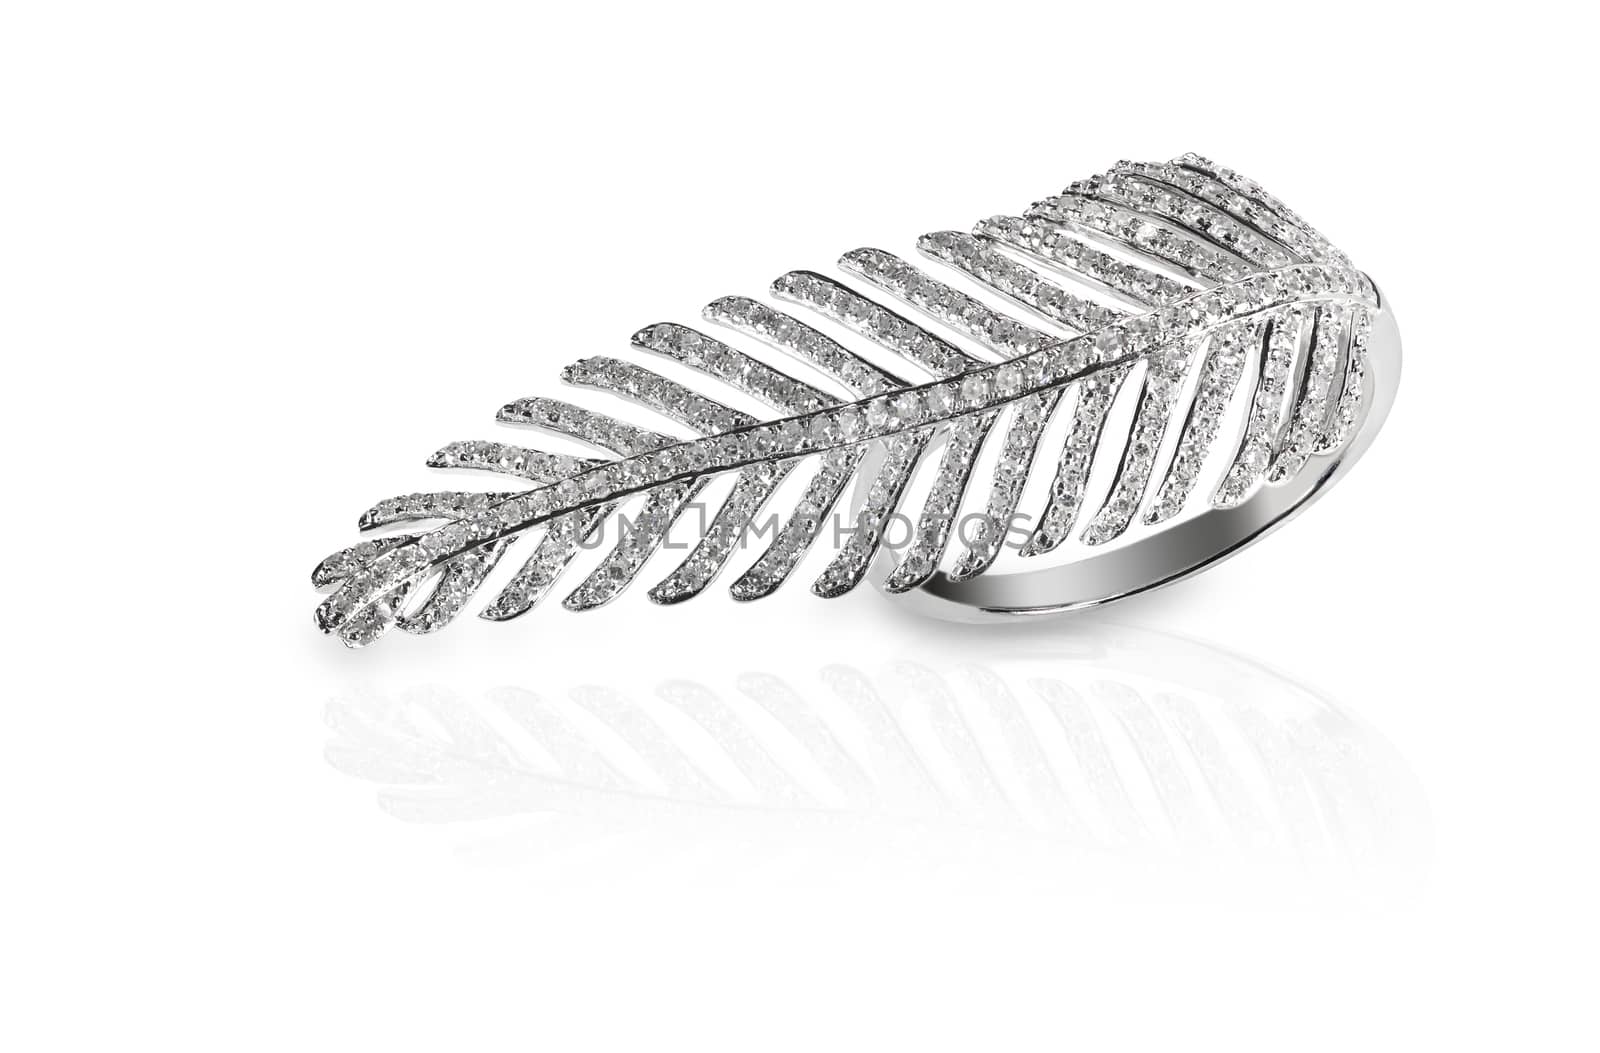 Leaf feather shaped diamond fashion ring isolated on white with a reflection